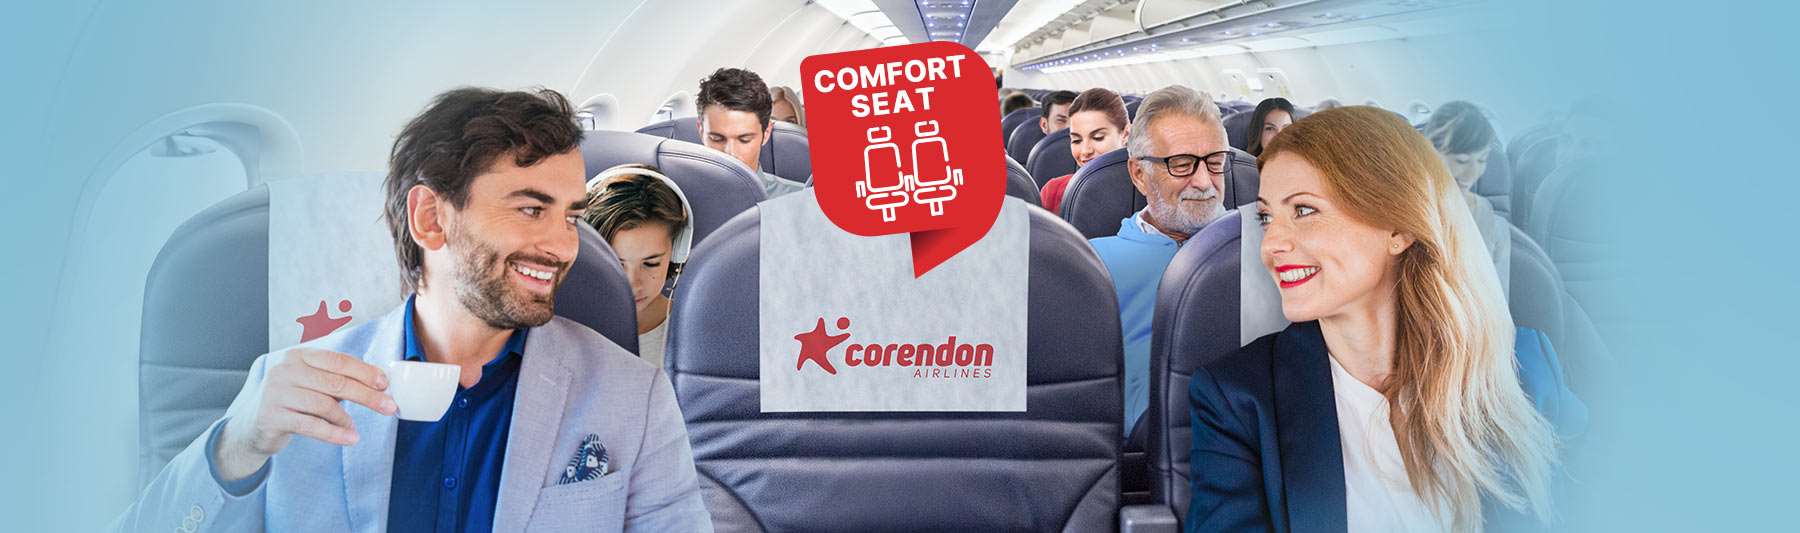 Enjoy the convenience ensured by our 'Comfort seats' - Corendon